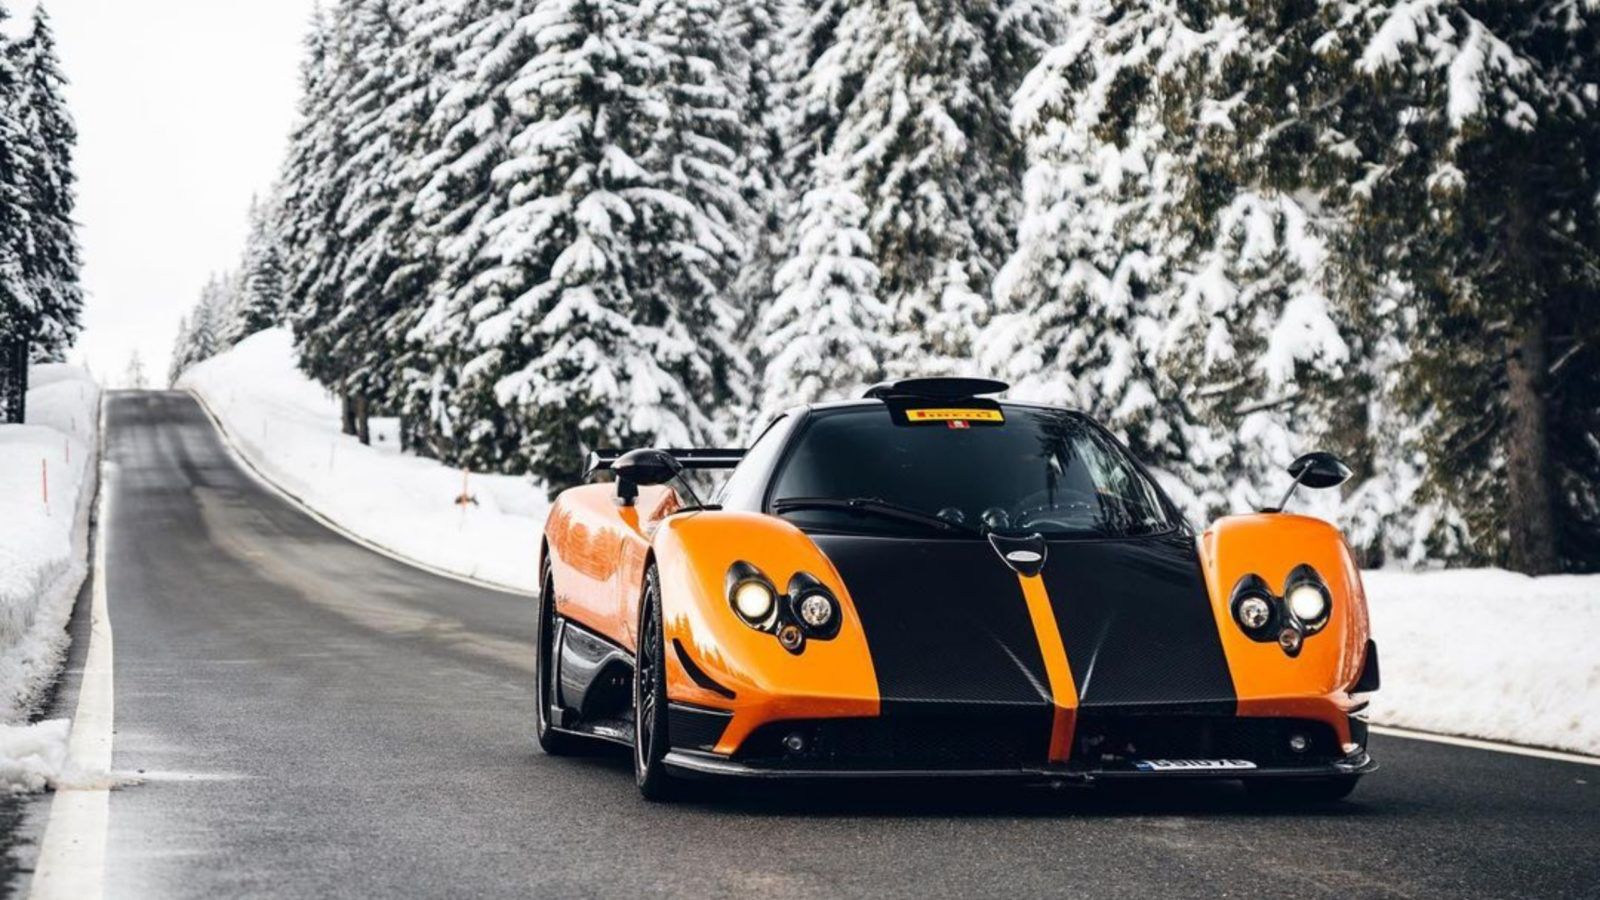 7 luxury cars to covet on our Instagram feeds